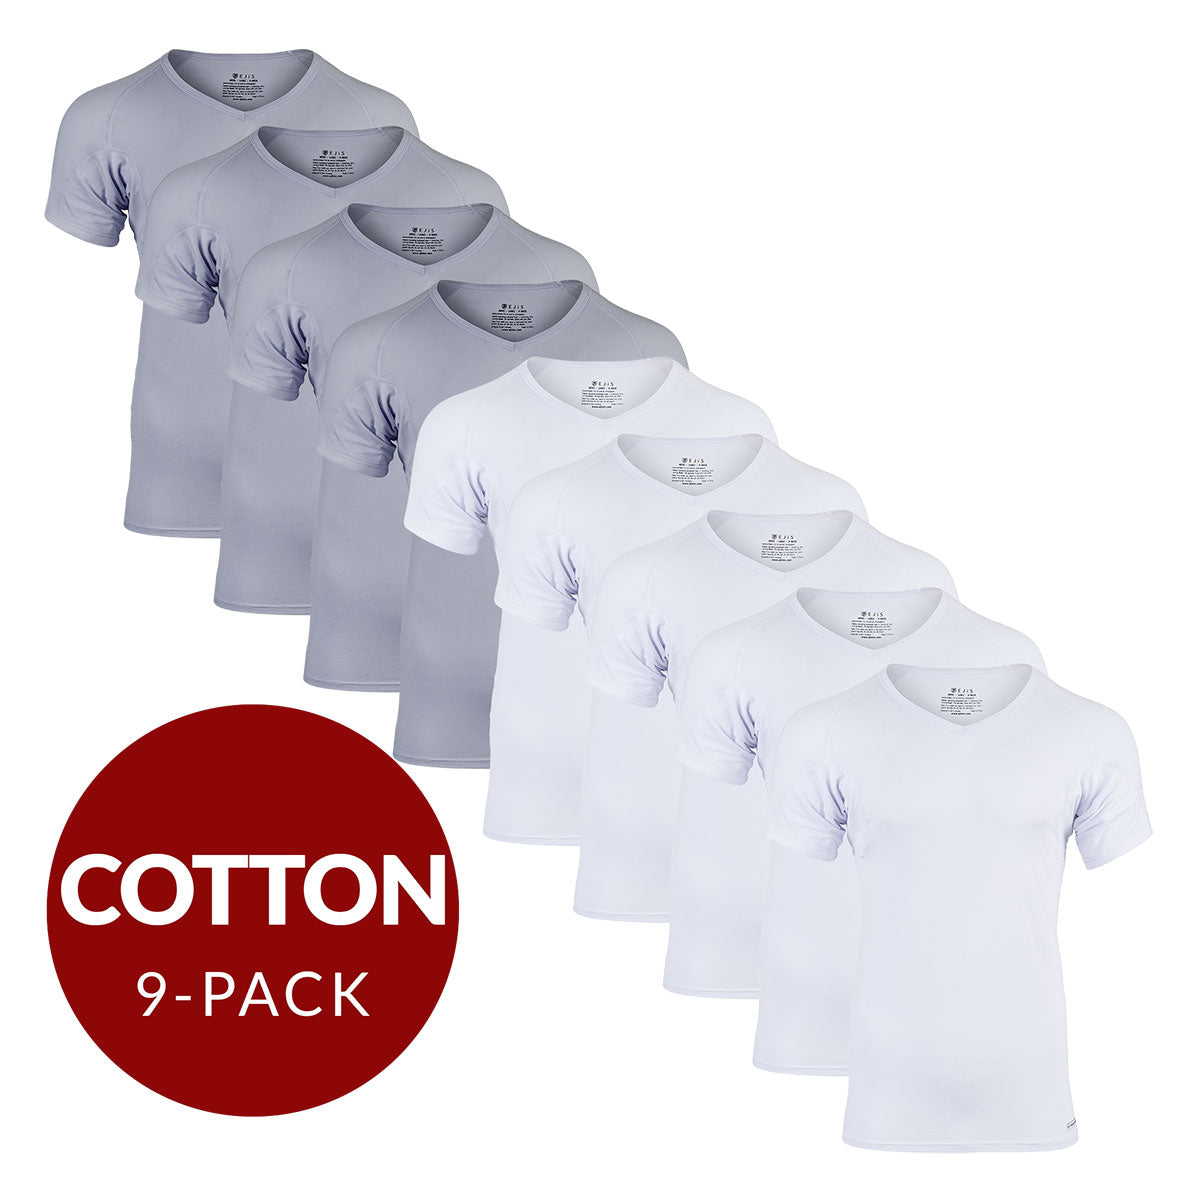 V-Neck Cotton Sweat Proof Undershirt For Men - Mix 9-Pack (5x White, 4x Grey) - Ejis